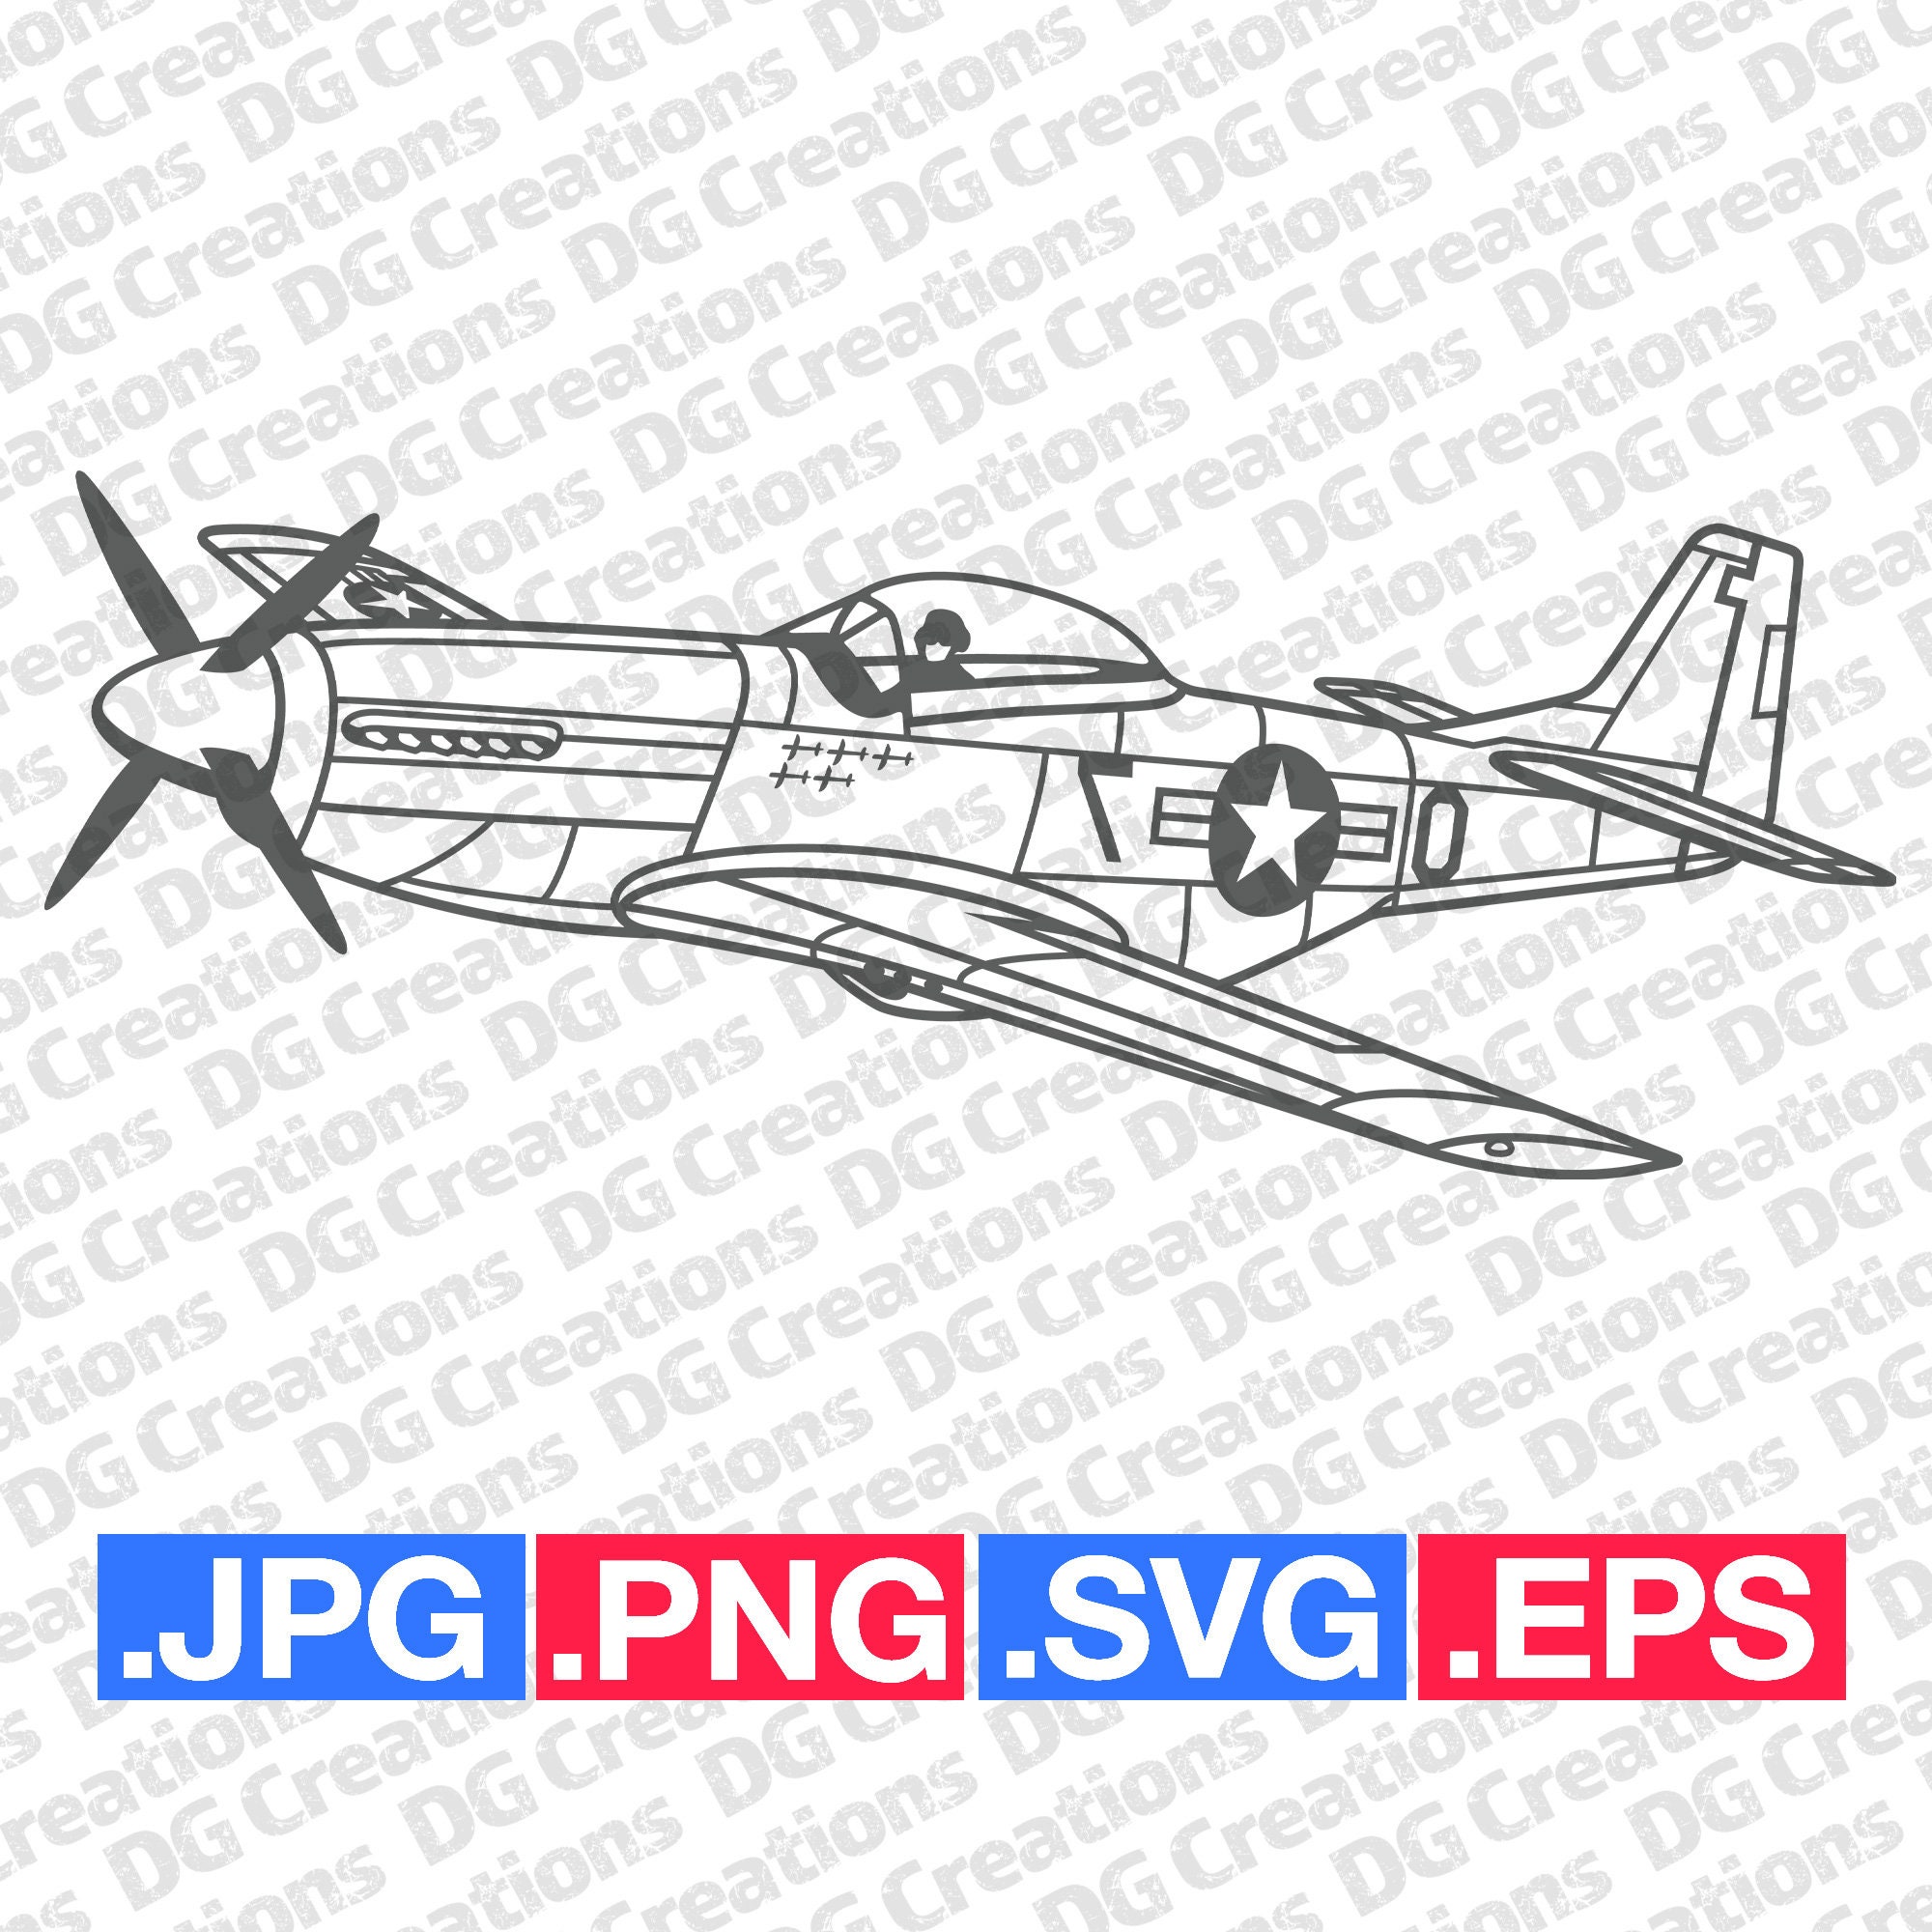 Mustang Plane Vector Images (36)